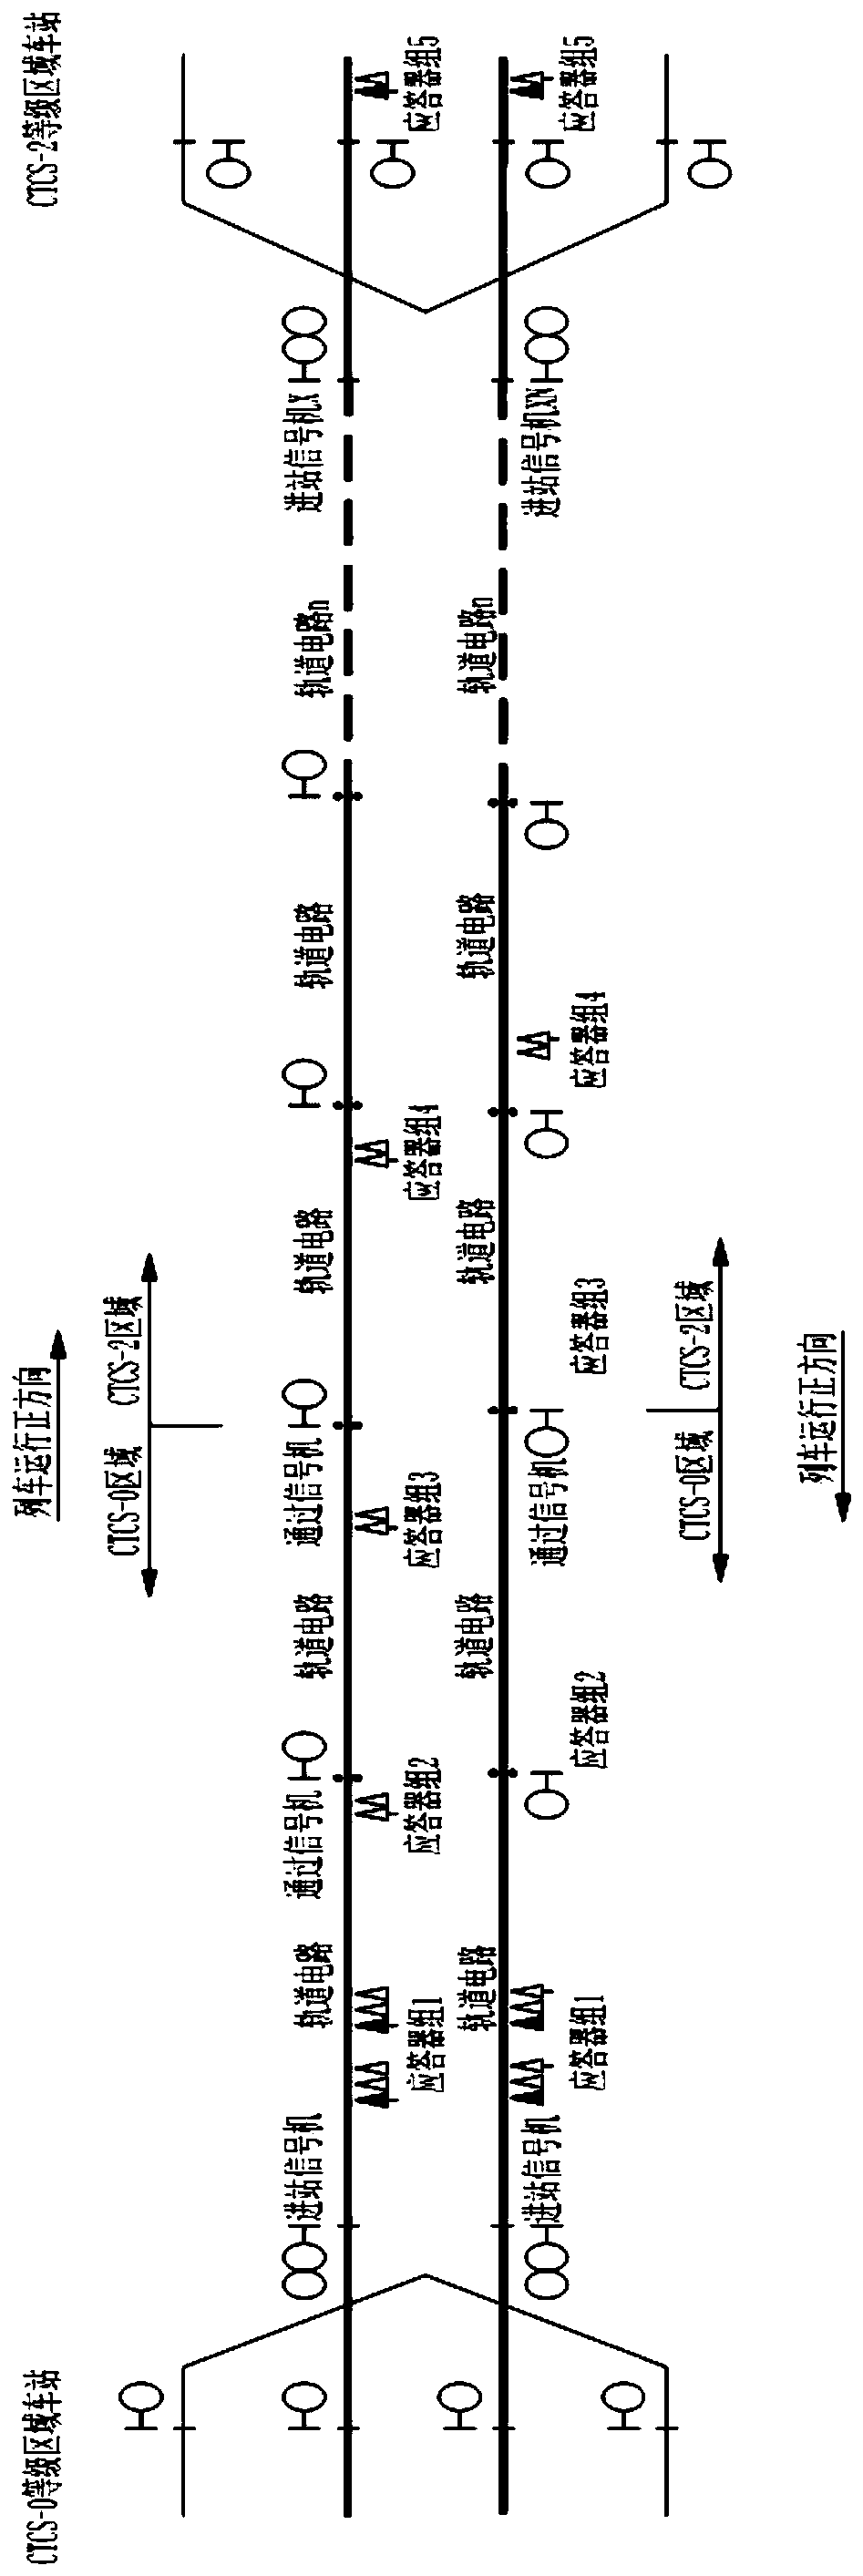 Train control grade transition system and method thereof